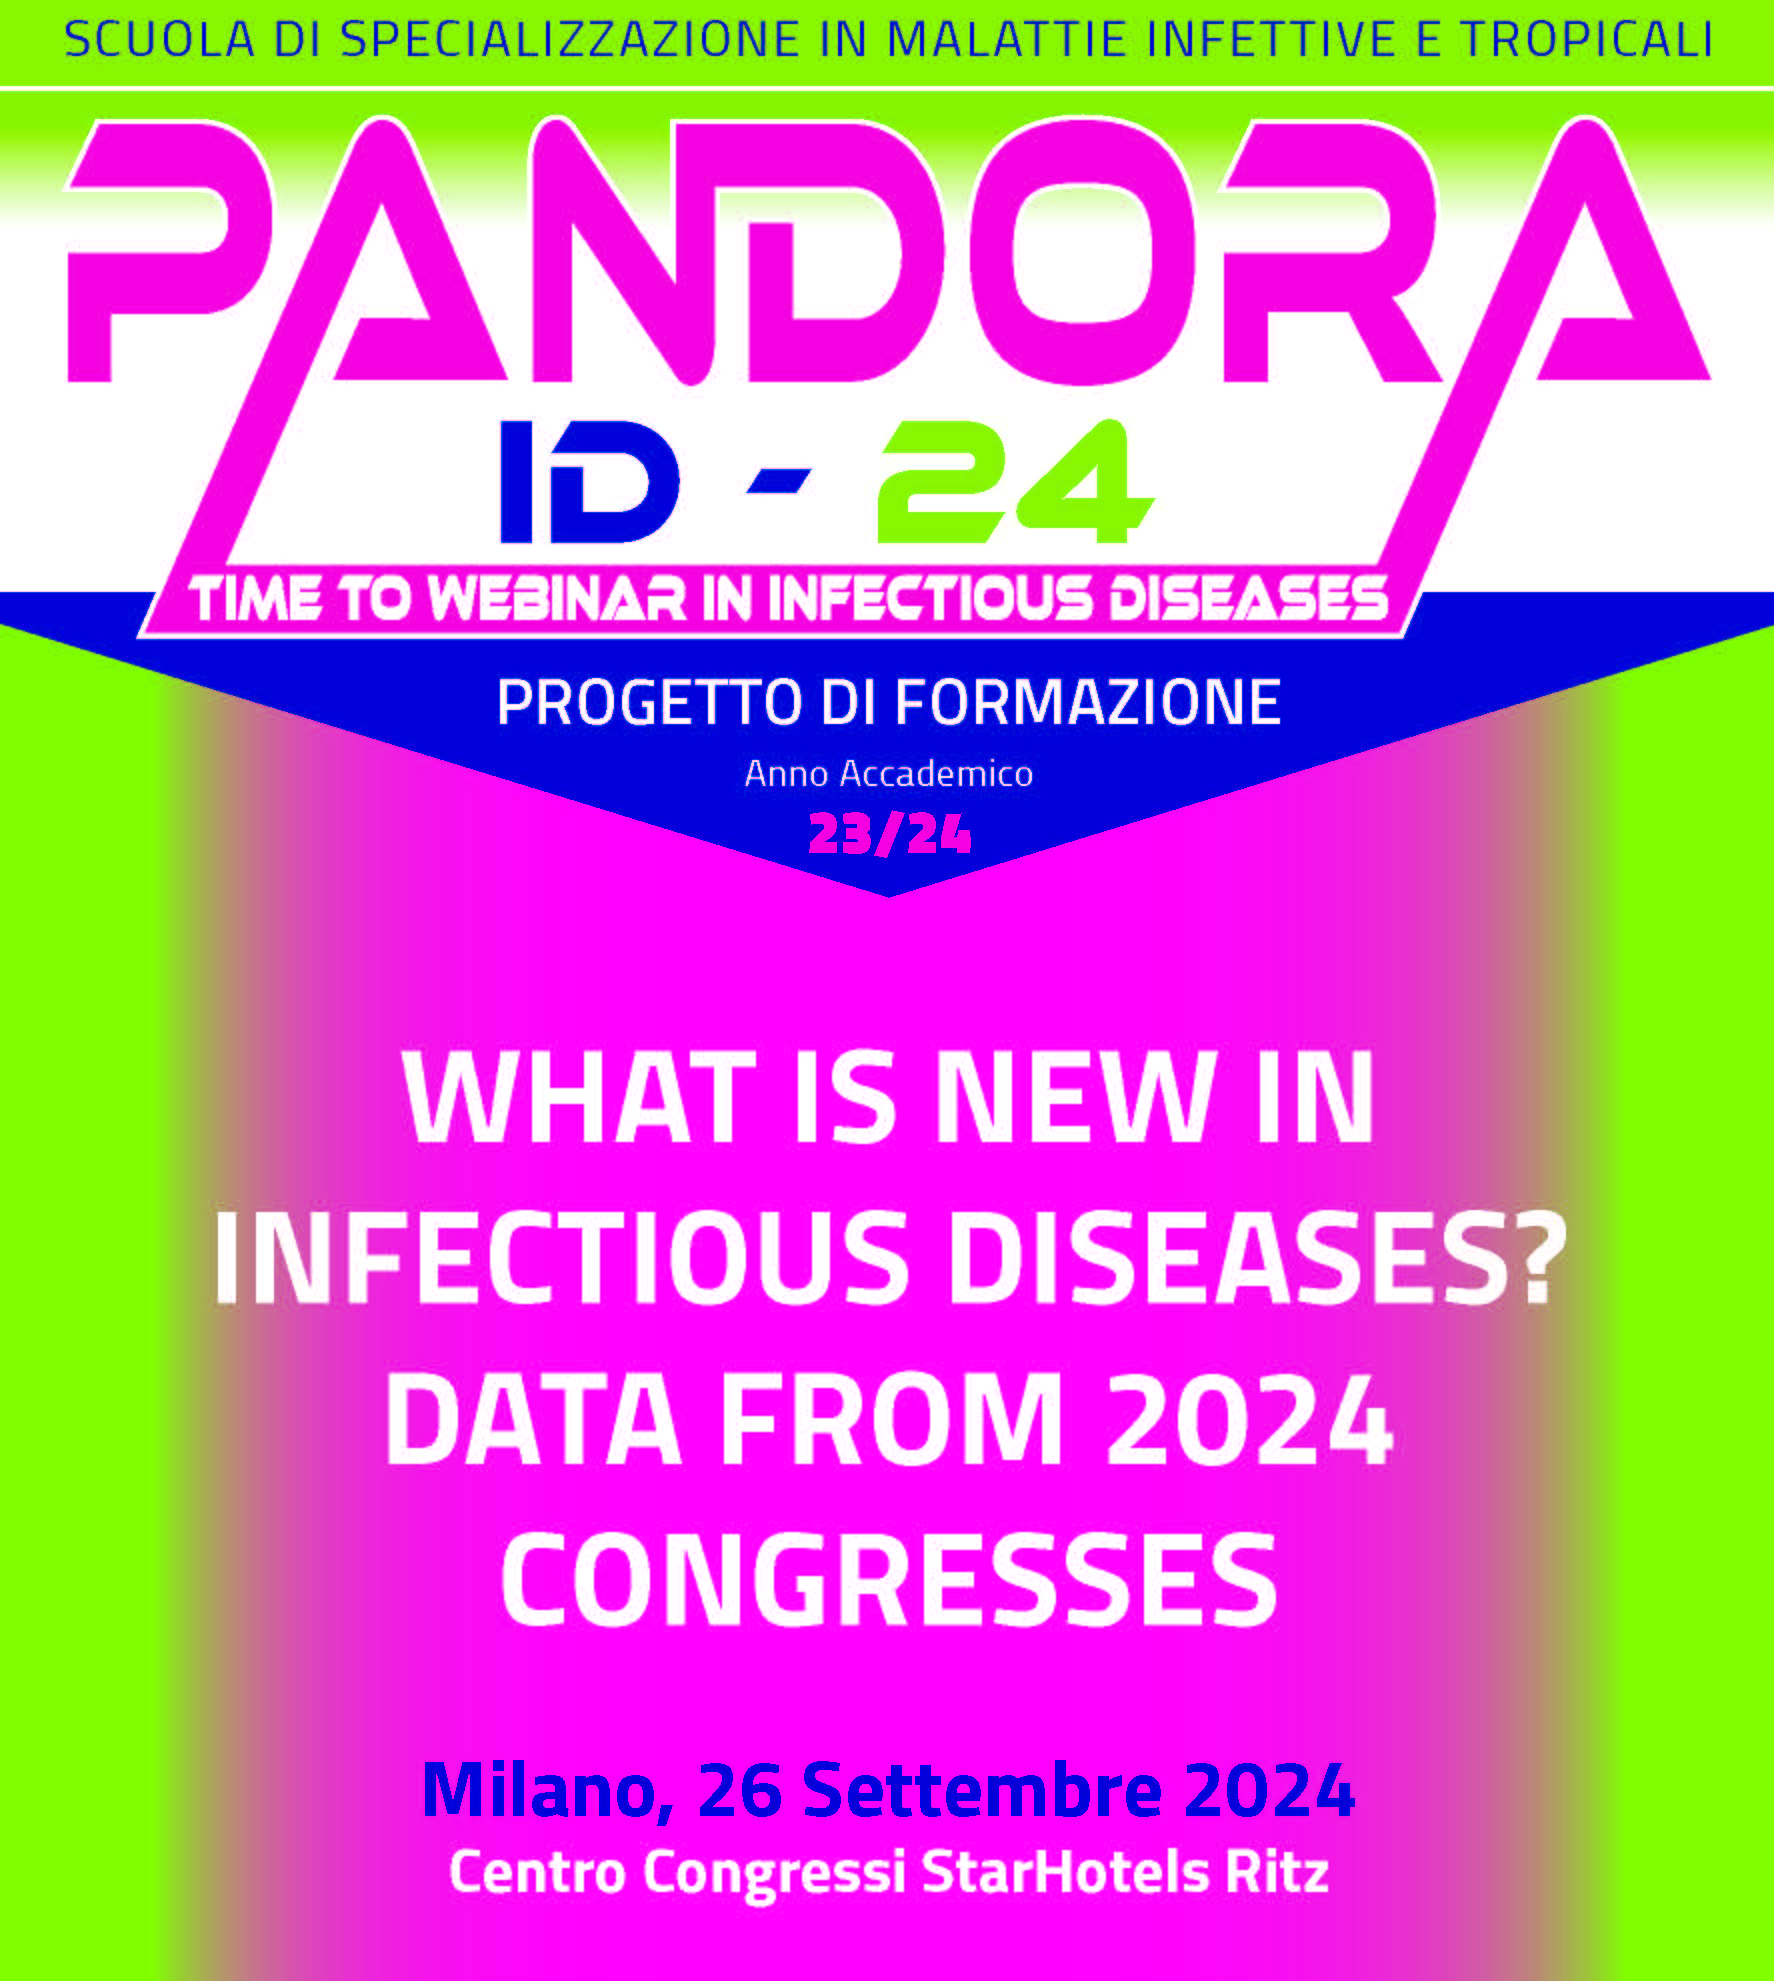 WHAT IS NEW IN INFECTIOUS DISEASES? DATA FROM 2024 CONGRESSES